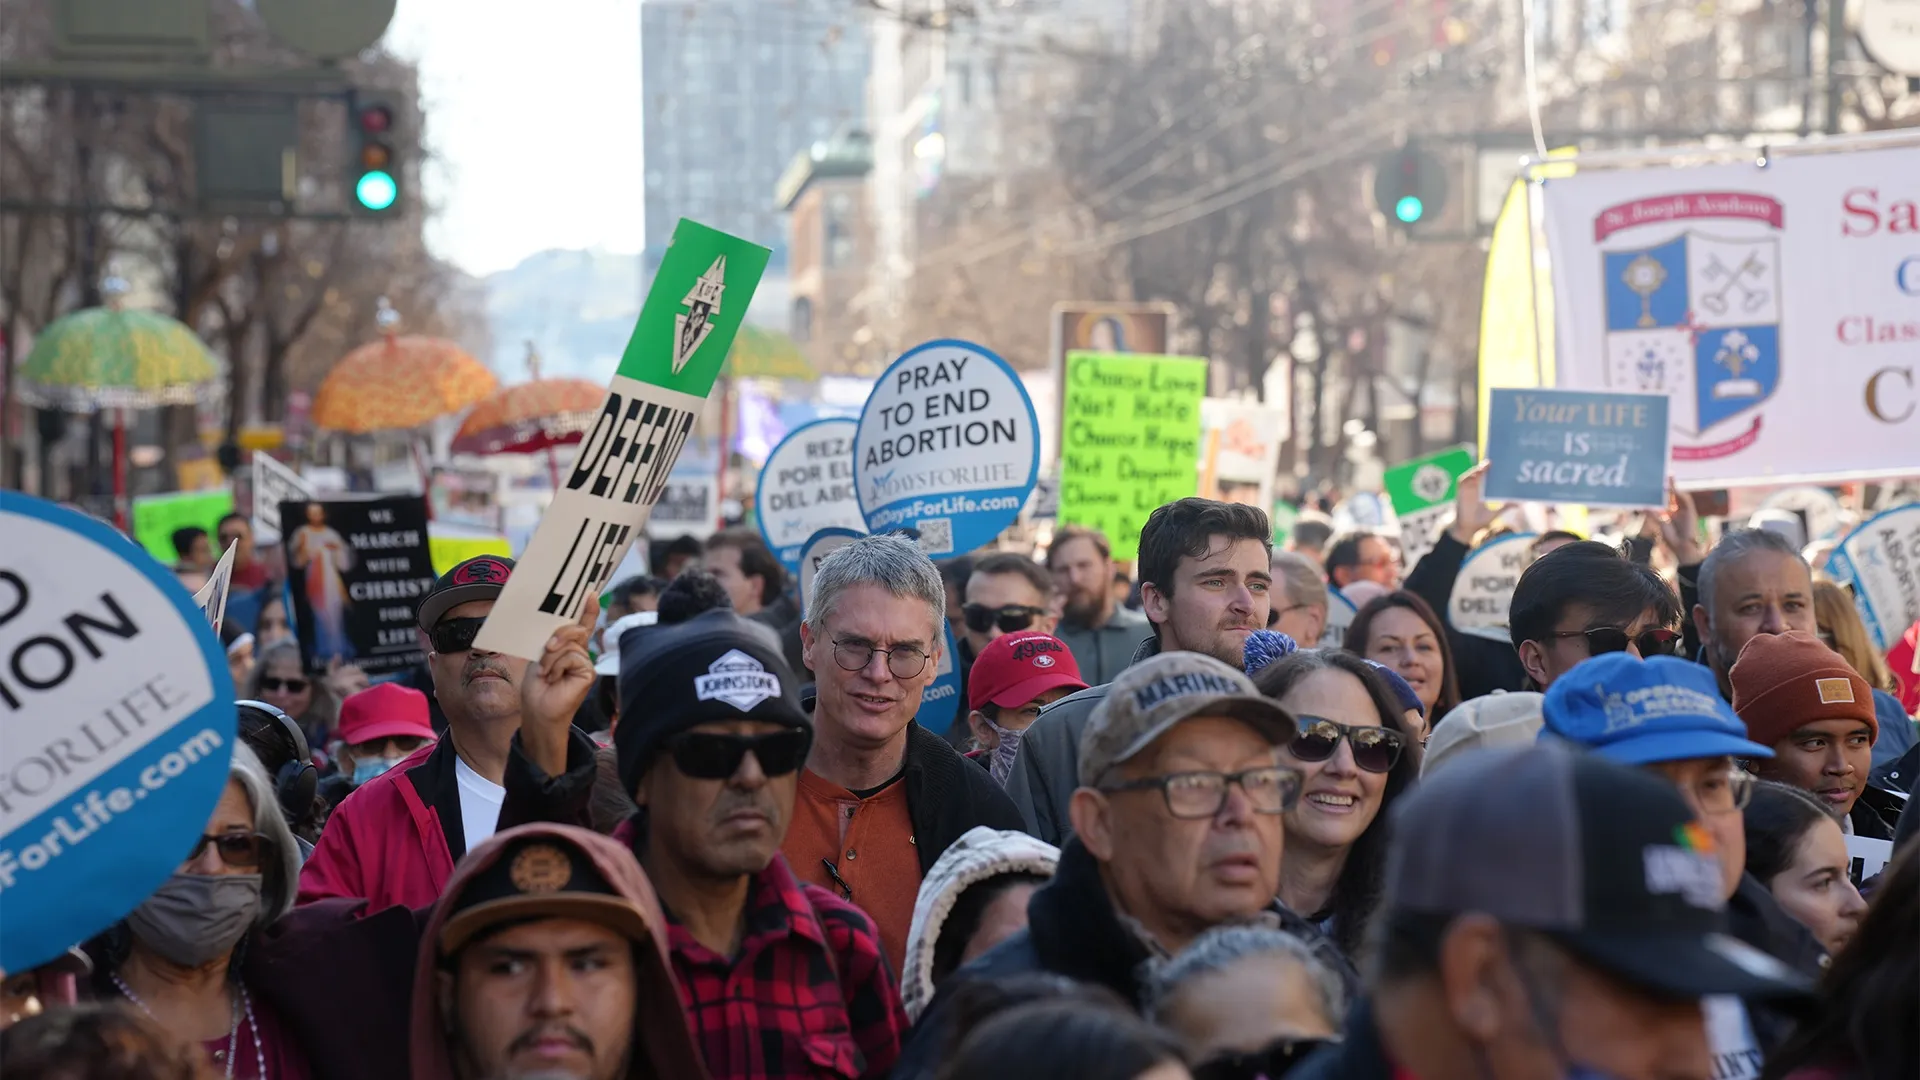 An estimated 10,000 people turned out for the Walk for Life West Coast in San Francisco  on Jan. 21, 2023, the second-largest pro-life demonstration in the U.S. after the national March for Life in Washington, D.C., which marked its 50th anniversary a day earlier.?w=200&h=150